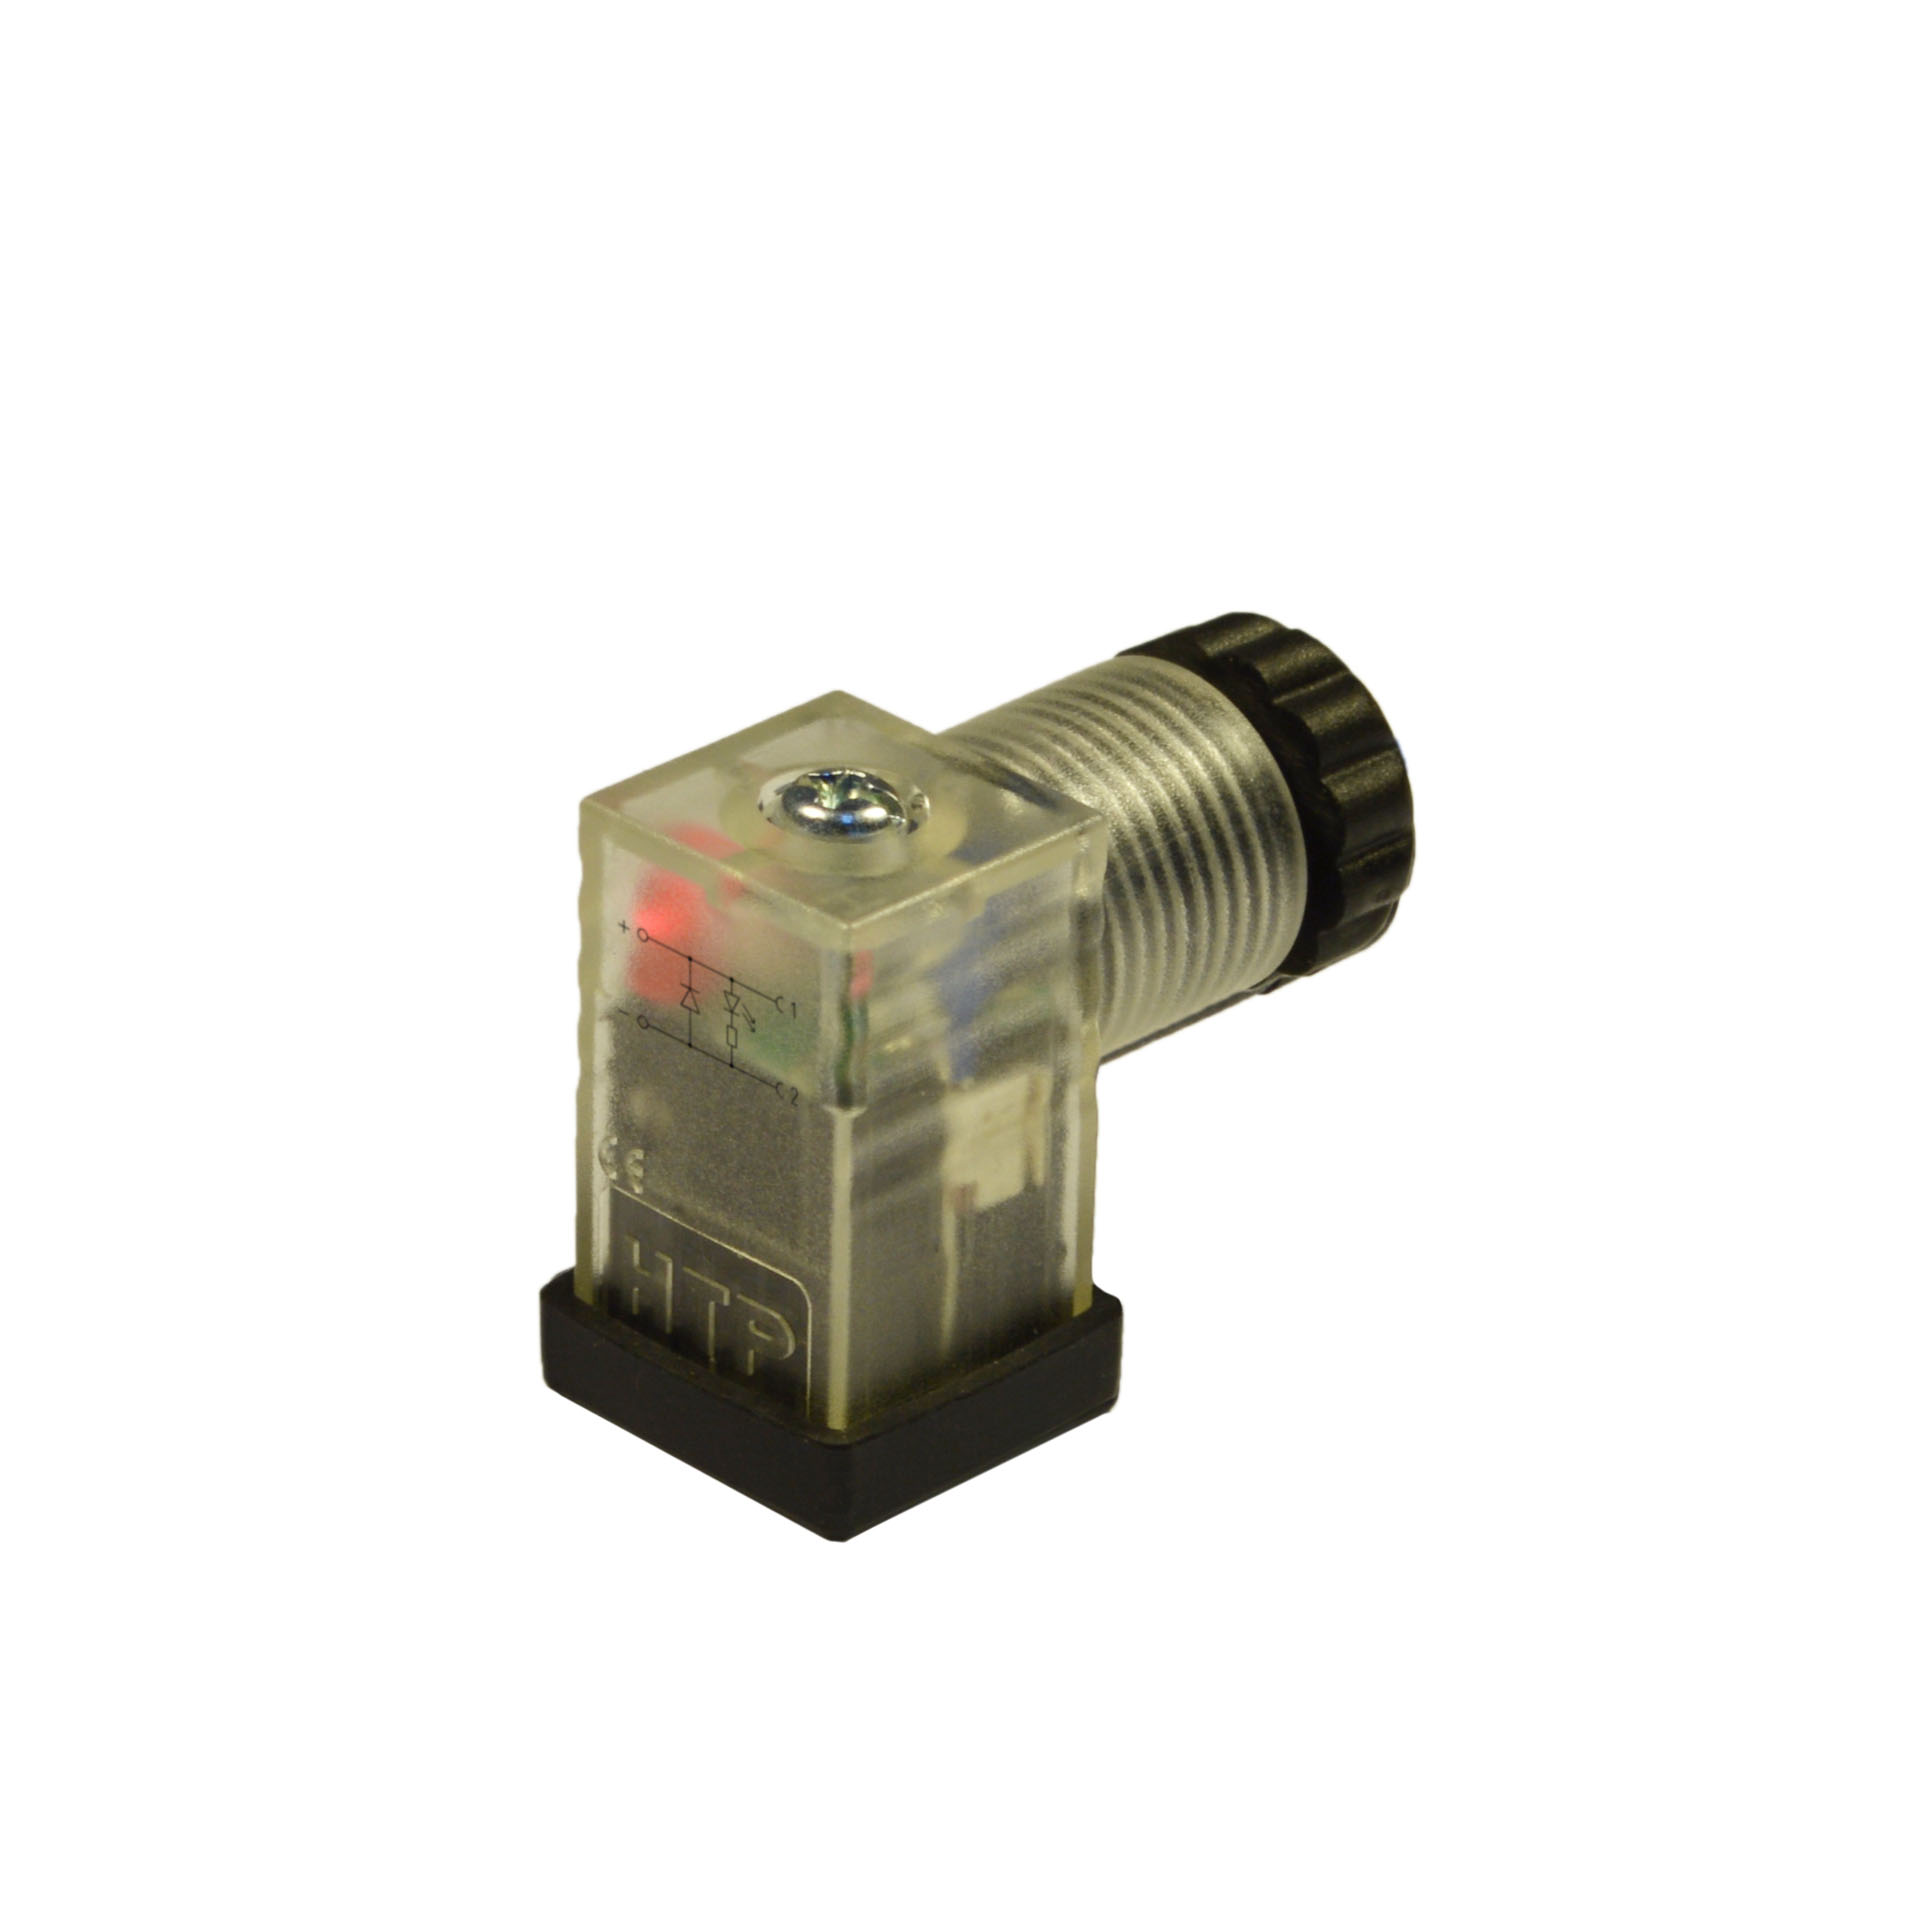 Industrial standard(typeC)field attachable,2p+PE(h.6),red LED+diode,230VDC,PG7